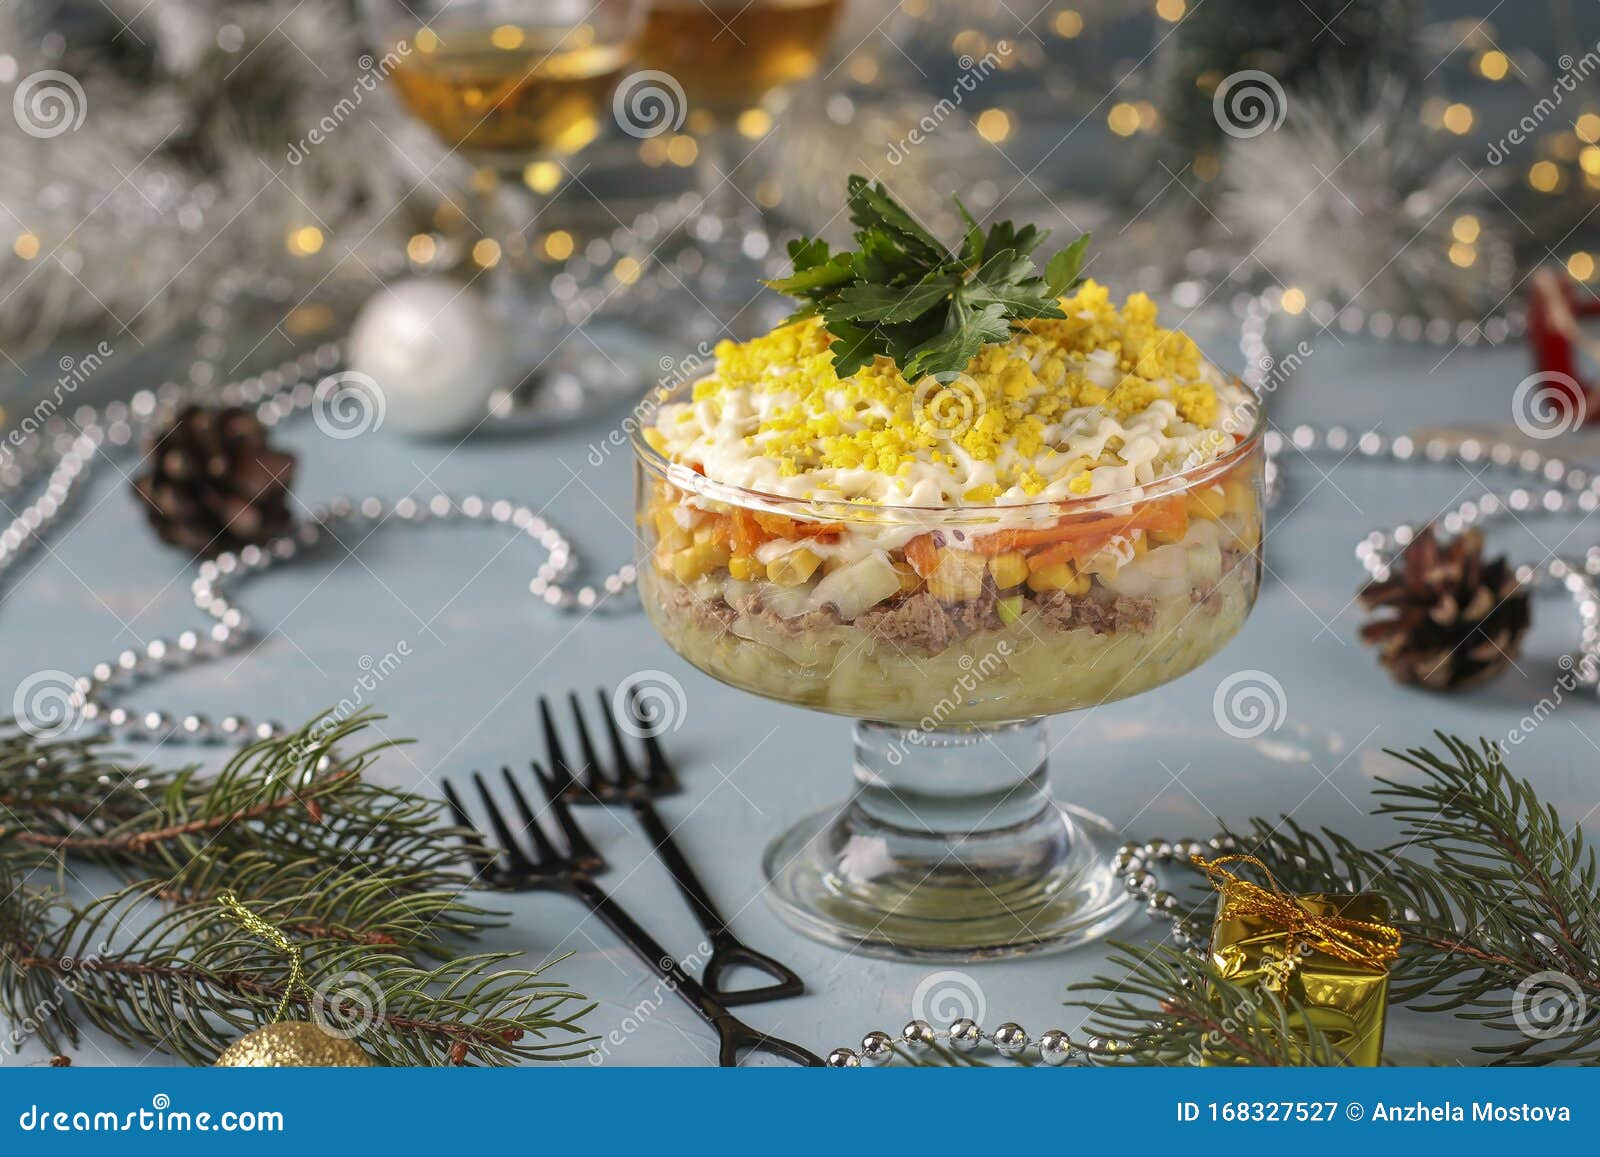 Holiday Salad with Canned Fish, Eggs, Carrots and Potatoes, Traditional ...